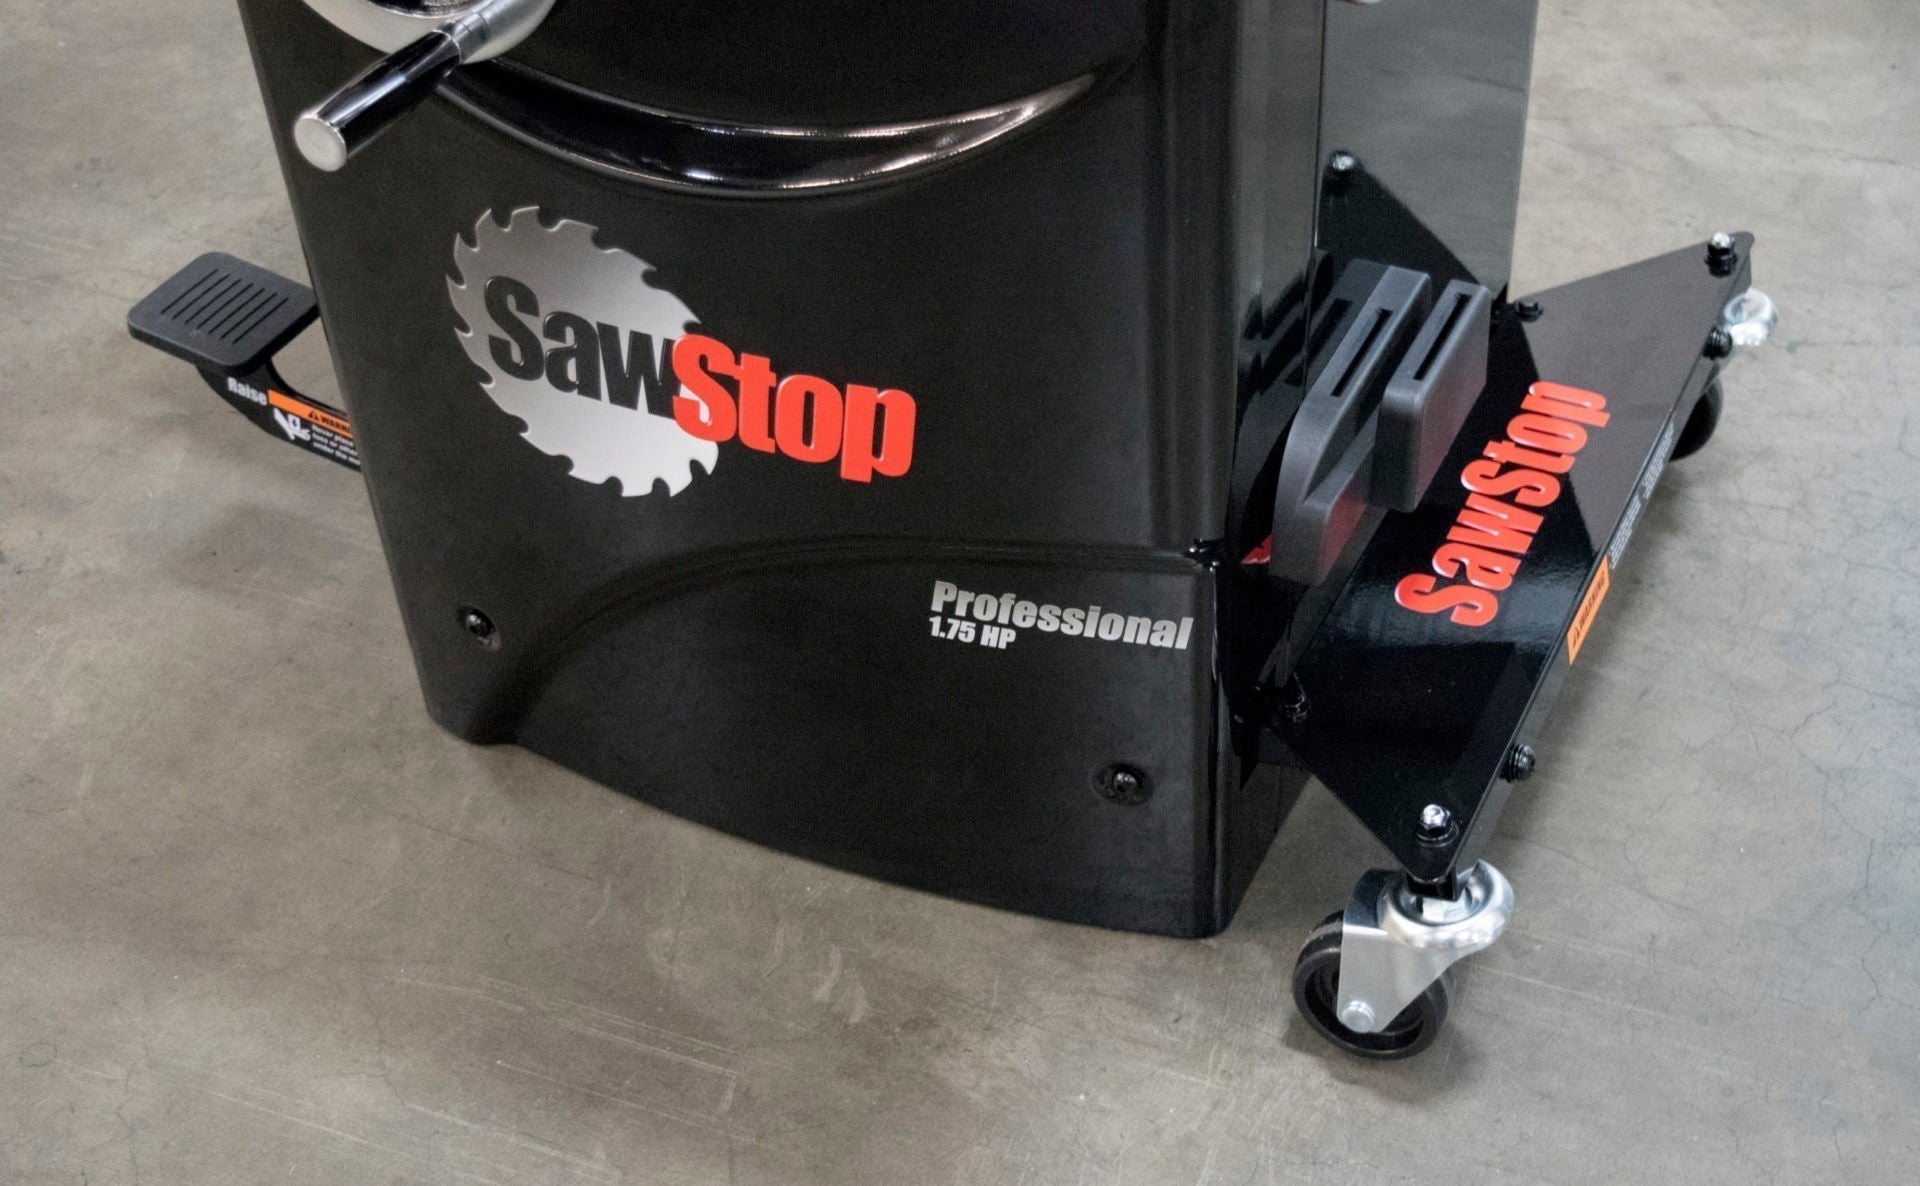 Sawstop Professional Integrated Mobile Base MB-PCS-000 Power Tool Services